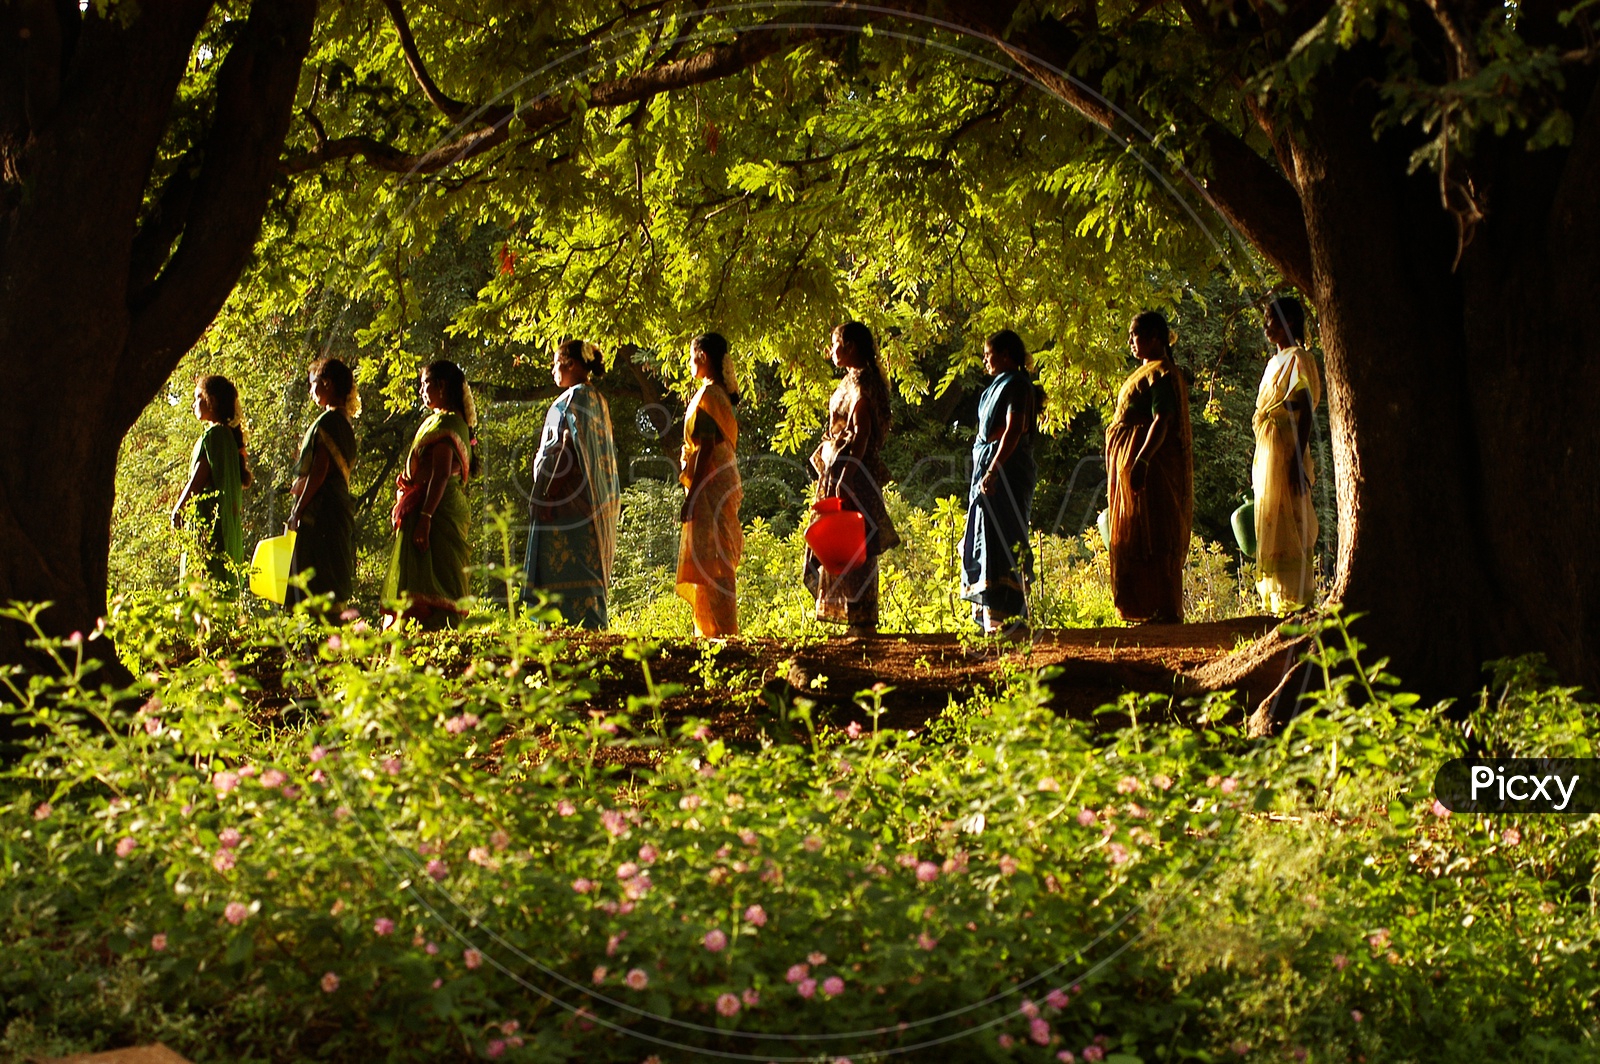 Indian rural women waiting to carry water in a queue